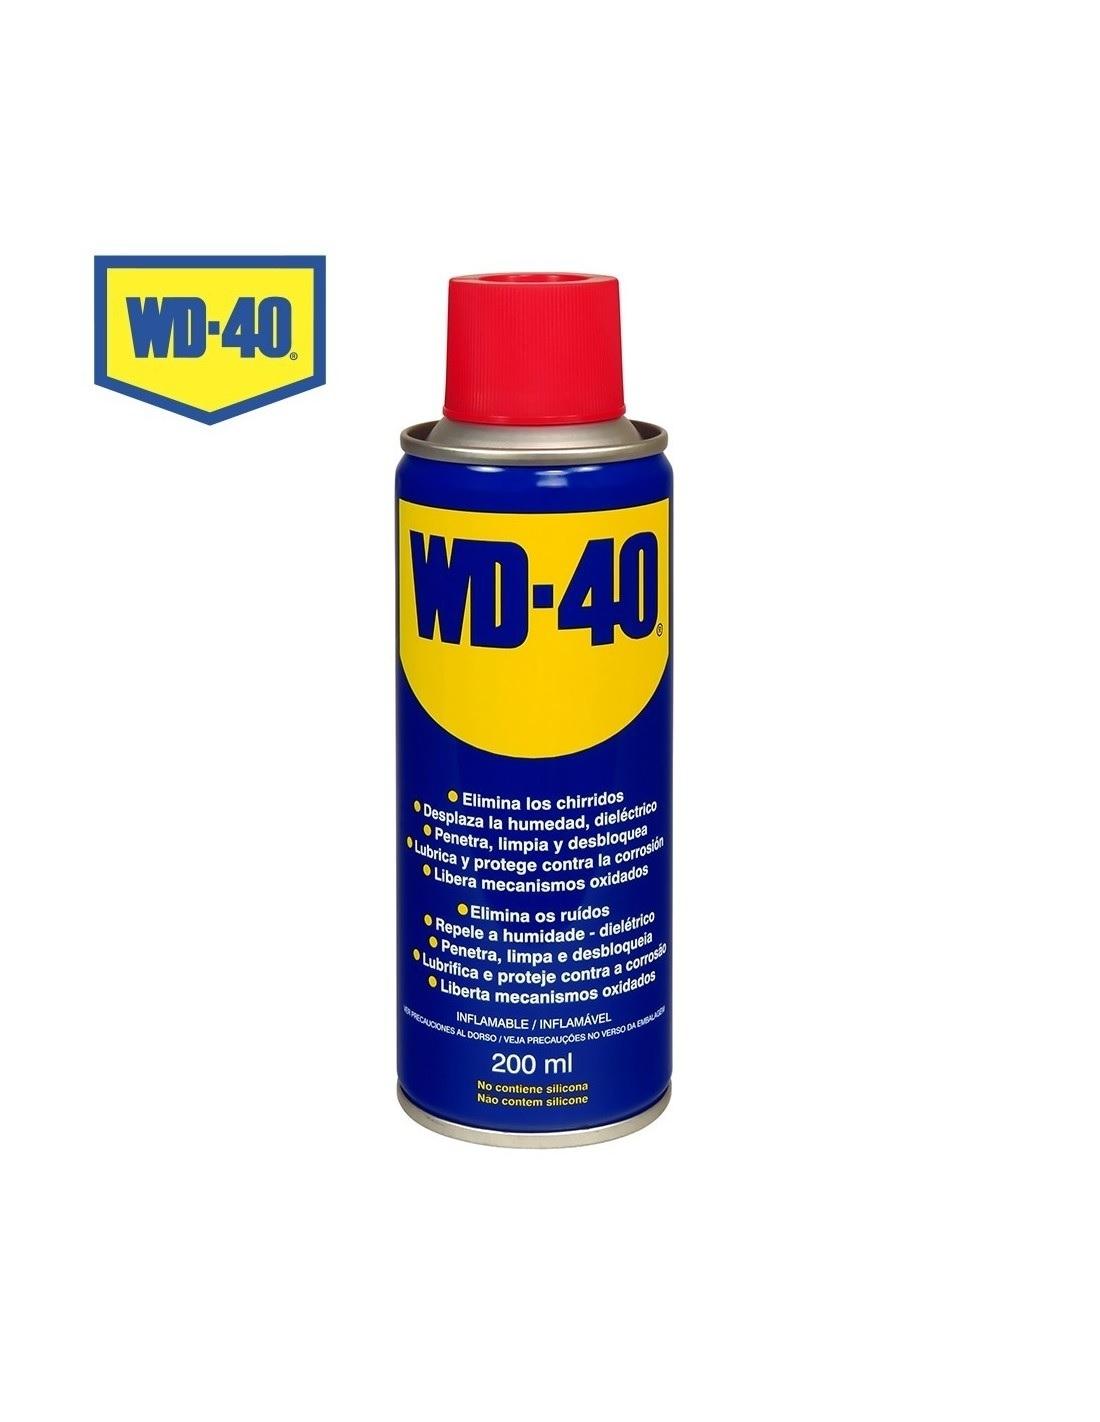 ACEITE MULTIUSOS DIELECTRICO WD-40